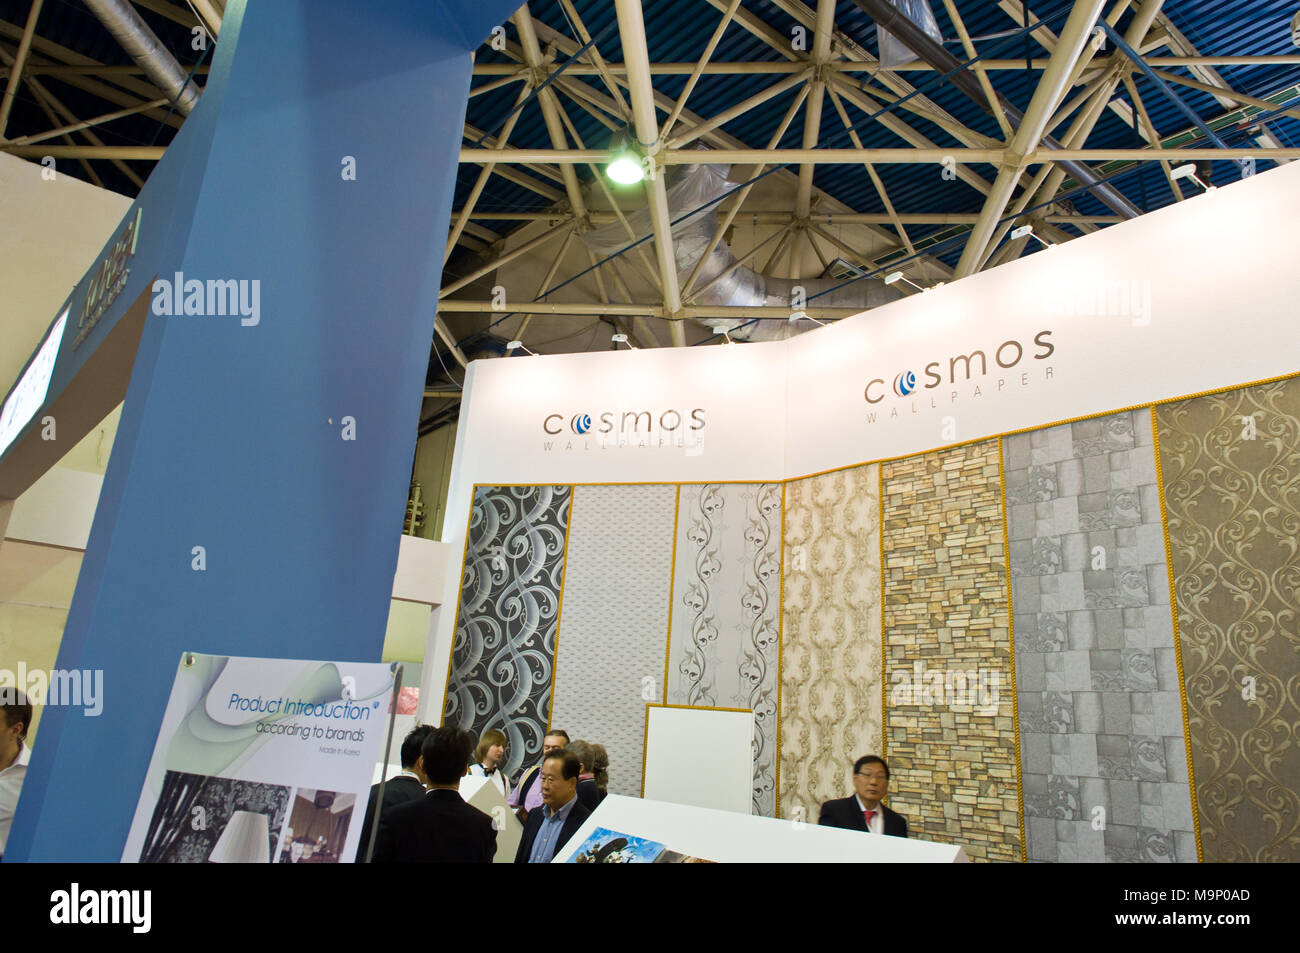 Cosmos booth at MosBuild 2013 Exhibition, april 2013, Moscow, Russia Stock Photo